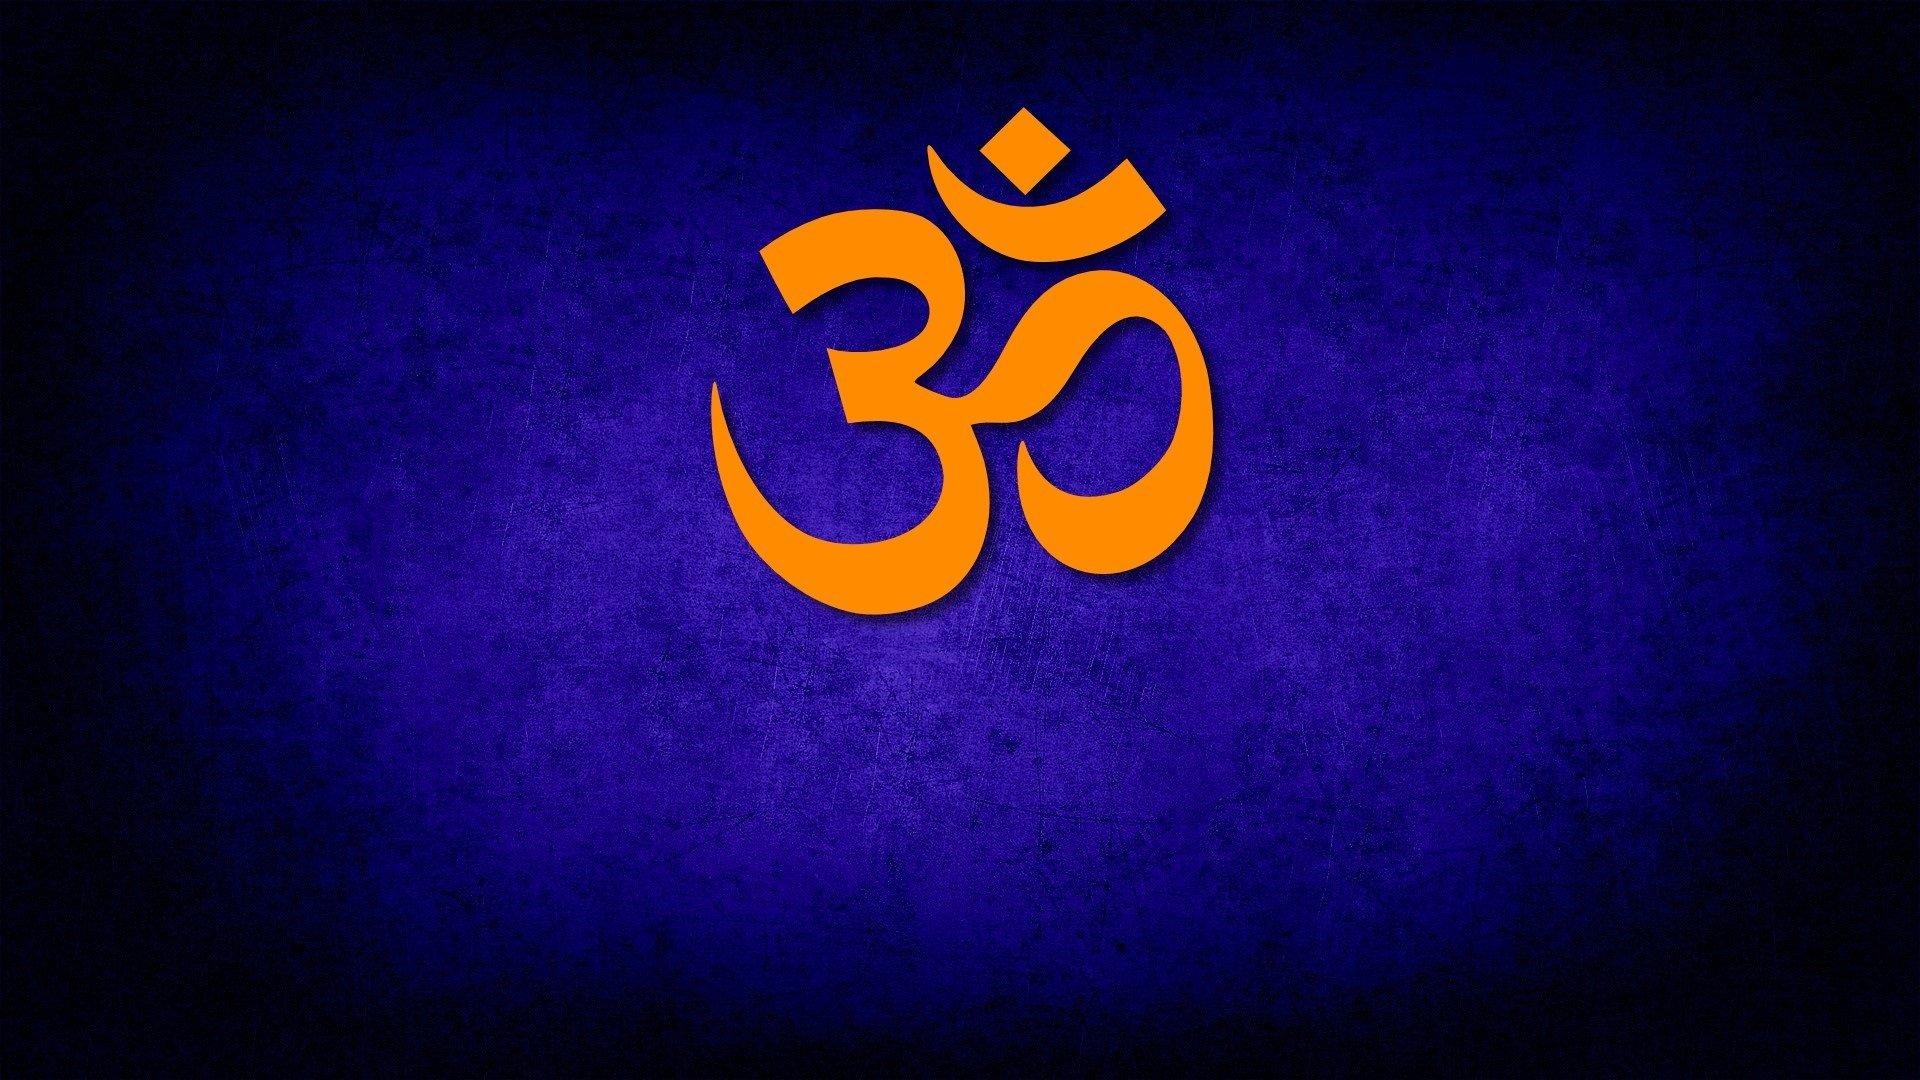 1920 x 1080 · jpeg - 1 Om (Hinduism) HD Wallpapers | Background Images - Wallpaper Abyss